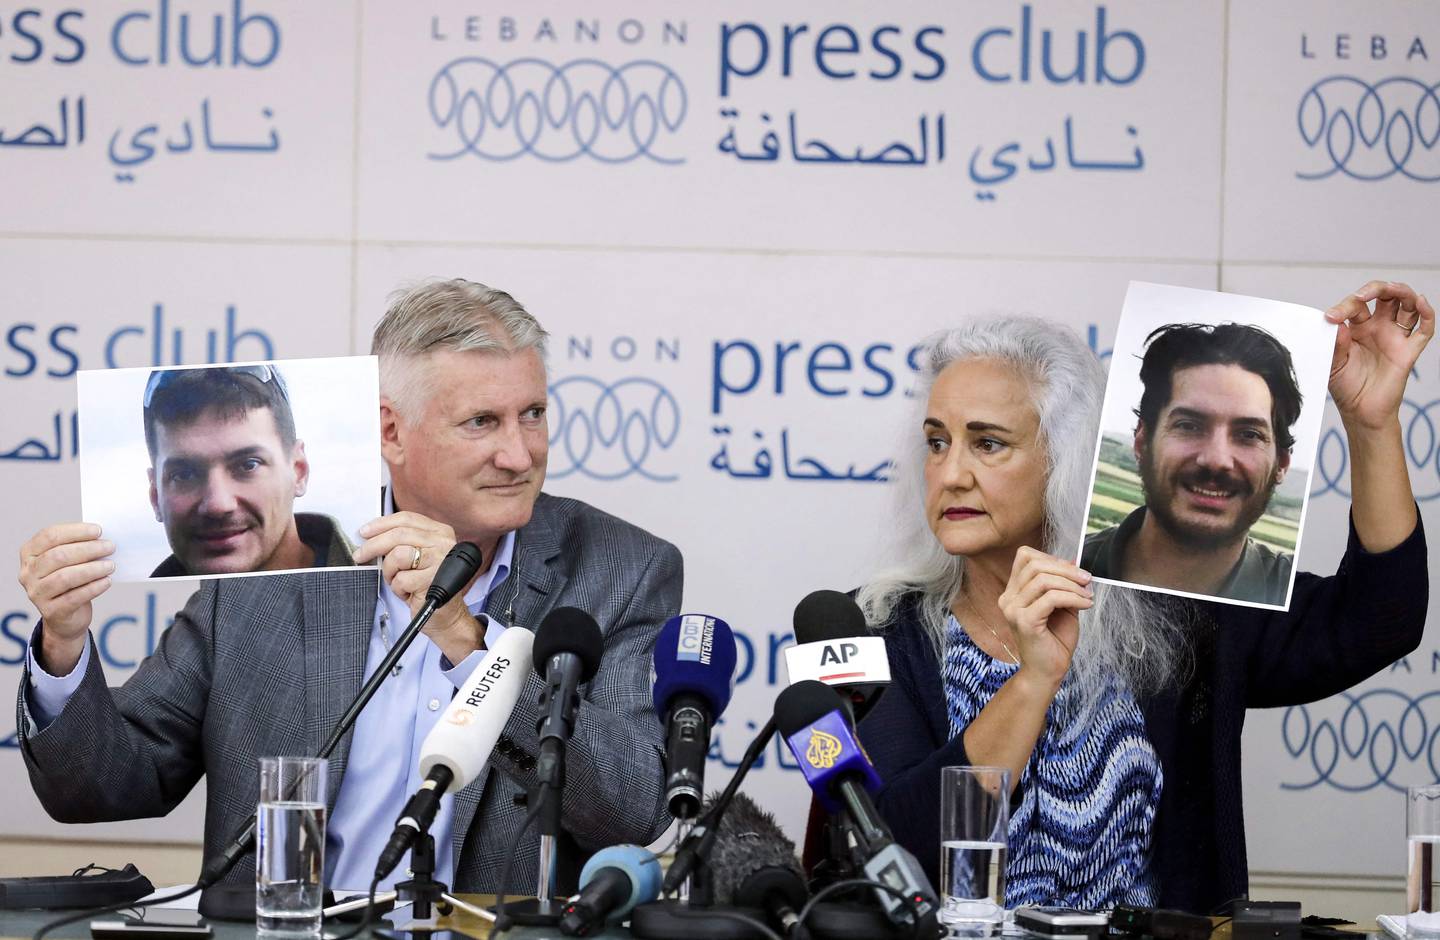 Marc and Debra Tice, parents of journalist Austin Tice, hold up portraits of him during a press conference in Beirut on July 20, 2017. AFP